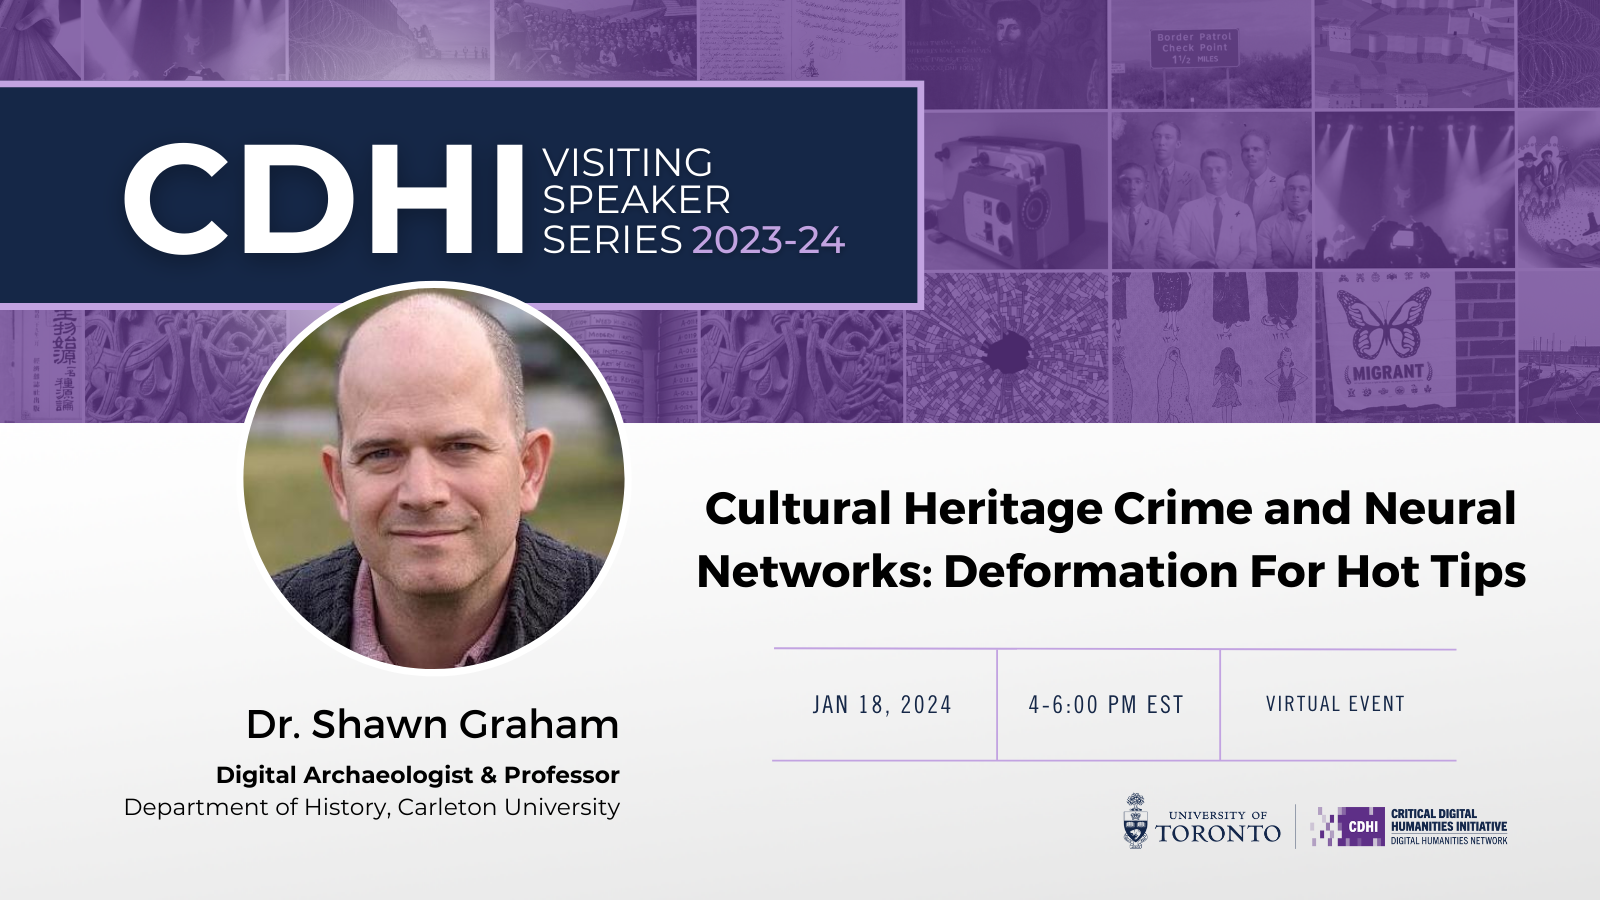 Shawn Graham, January 18, 2024, 4–6 pm. Cultural Heritage Crime and Neural Networks: Deformation for Hot Tips. Zoom Registration Link: https://utoronto.zoom.us/meeting/register/tZApfuutqTIqHtRO2O_61e7QTCszCJ4ZtAnN